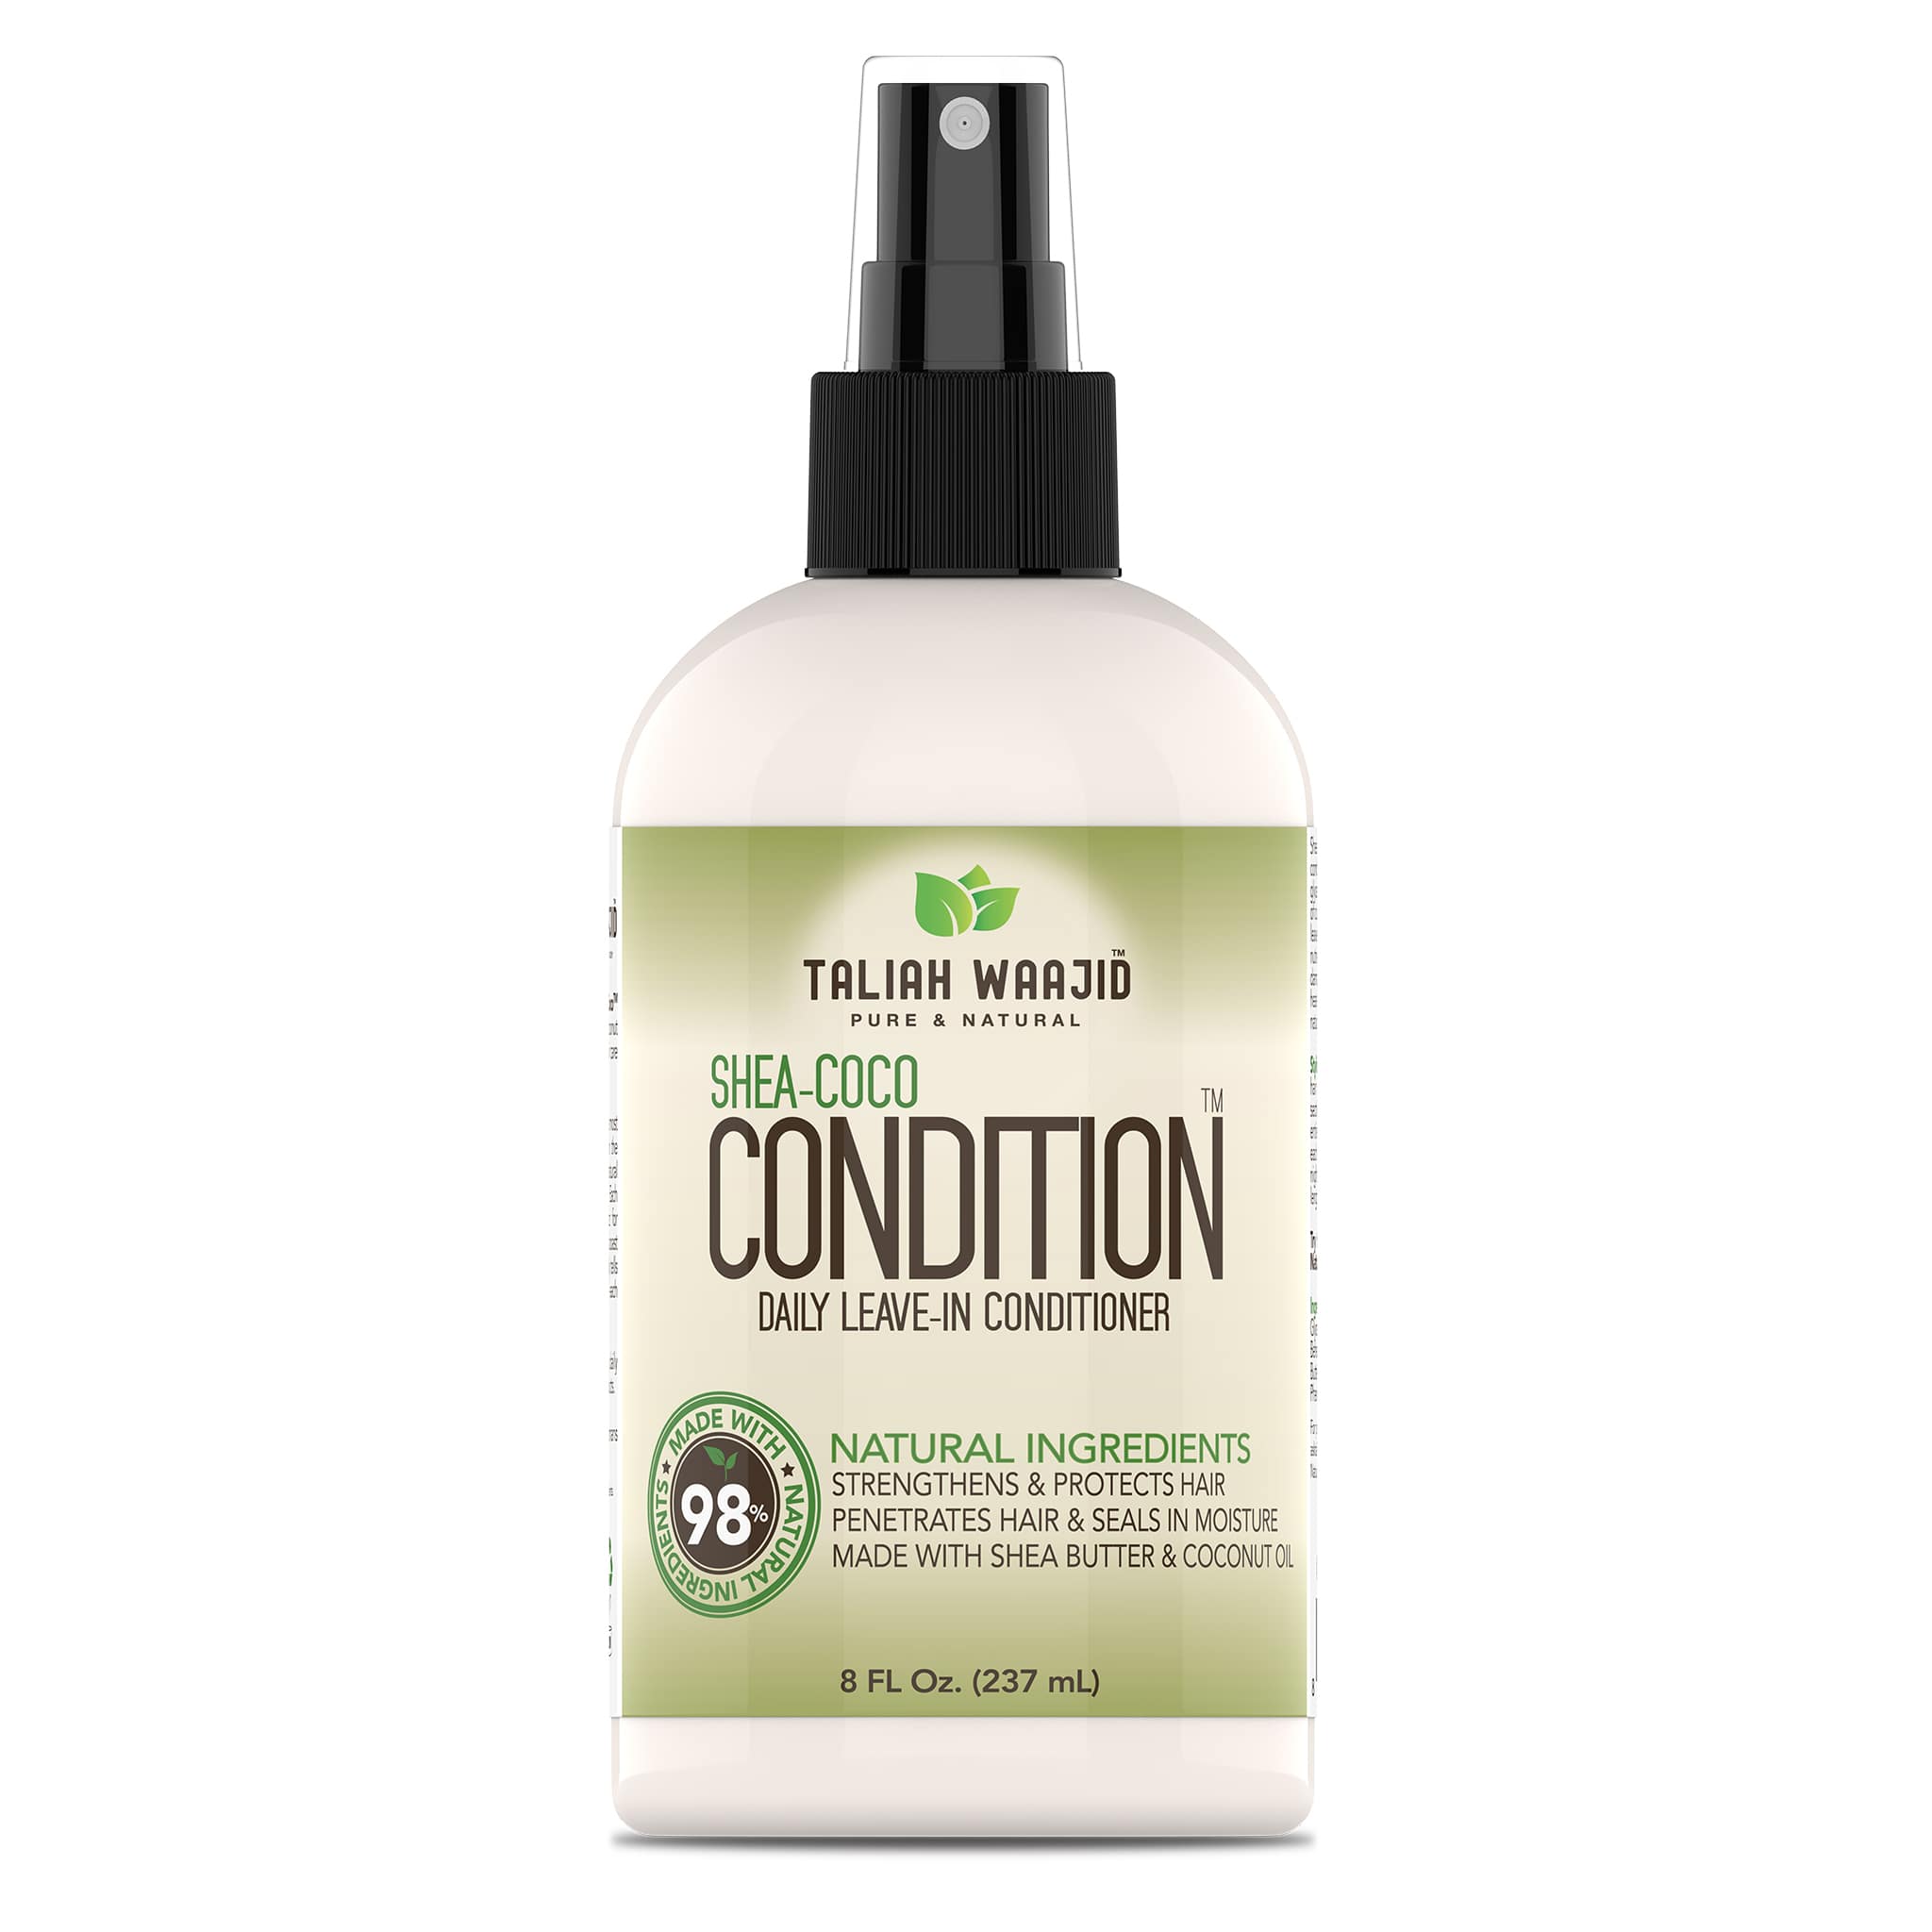 Taliah Waajid Pure & Natural Shea-Coco Leave-In Condition 8oz